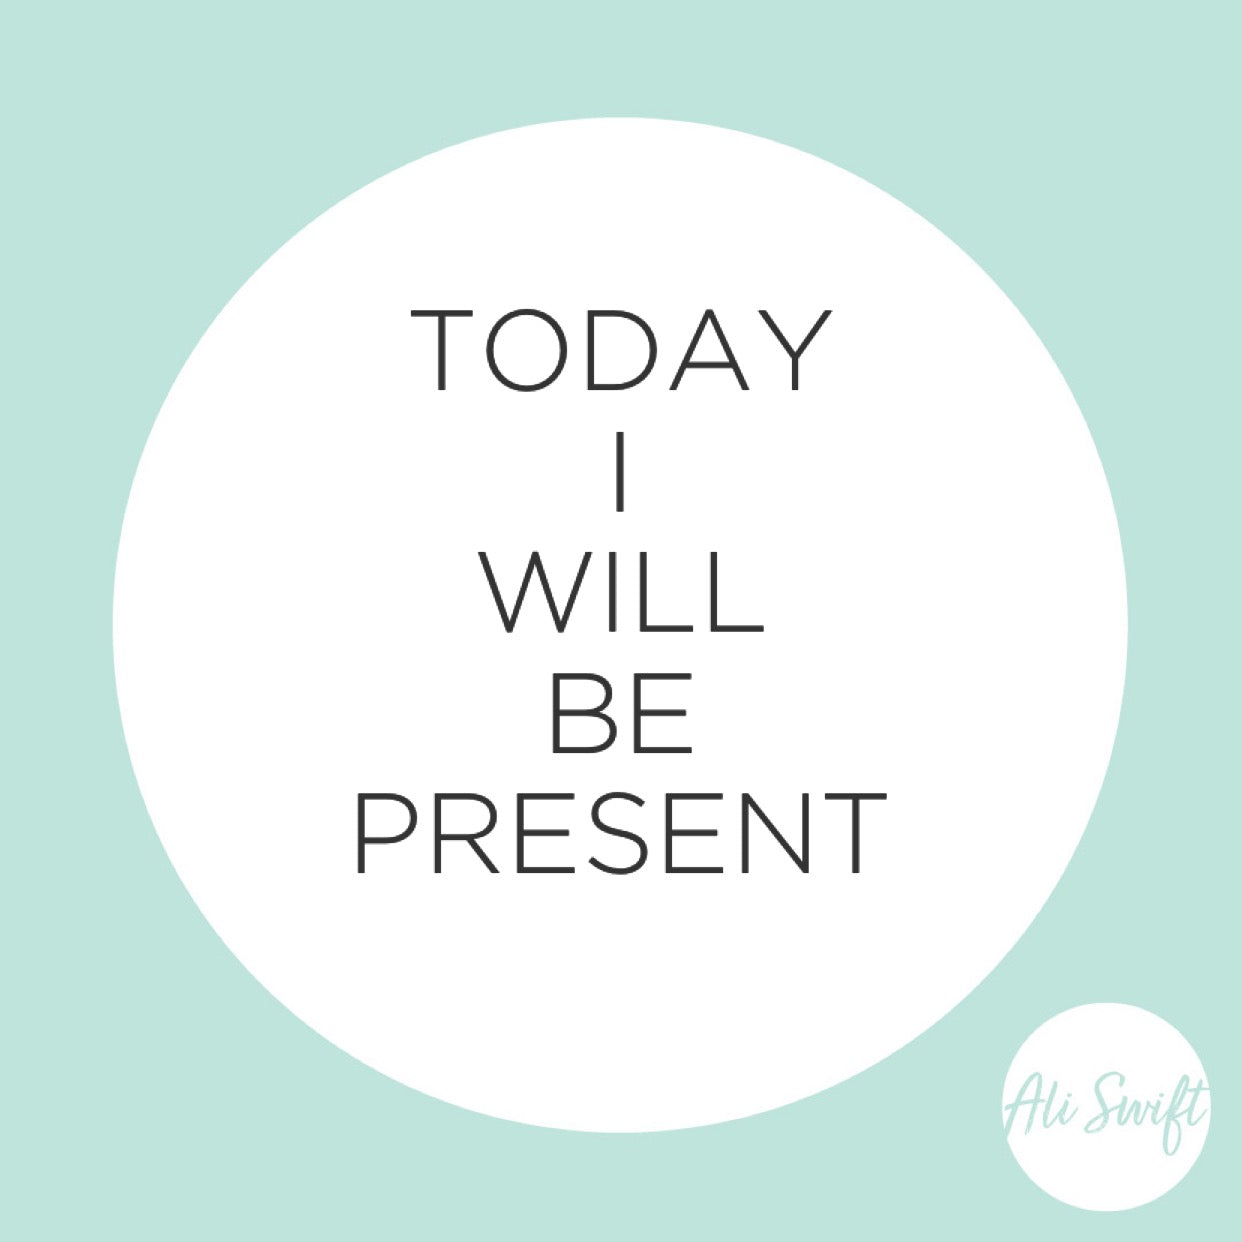 “TODAY I WILL BE PRESENT”